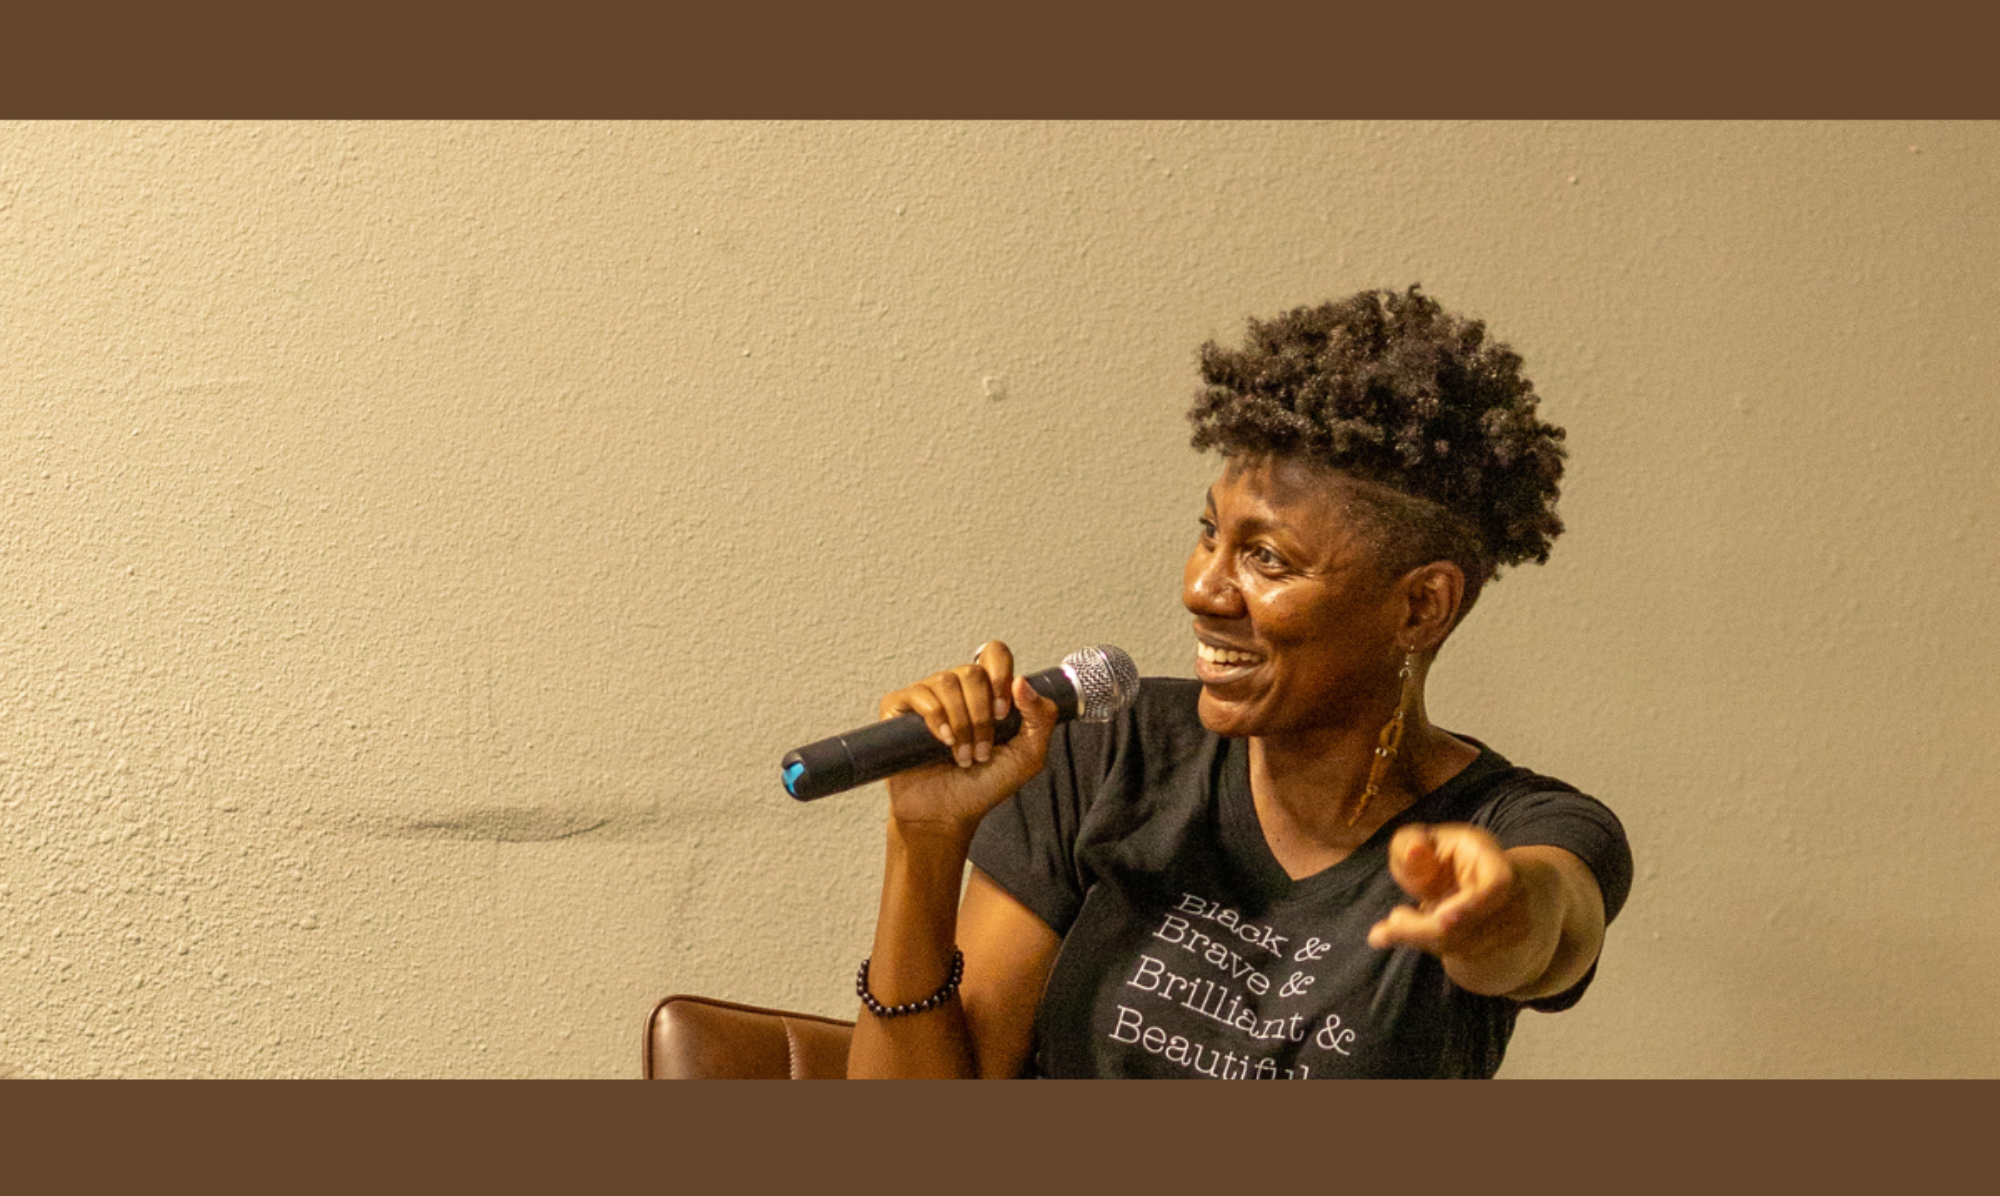 doctor sarah l webb public speaker holding mic while seated on a stool in front of an audience and smiling at her 10 year anniversary event for colorism healing in dallas fort worth texas she's wearing her black and brave and brilliant and beautiful t shirt.